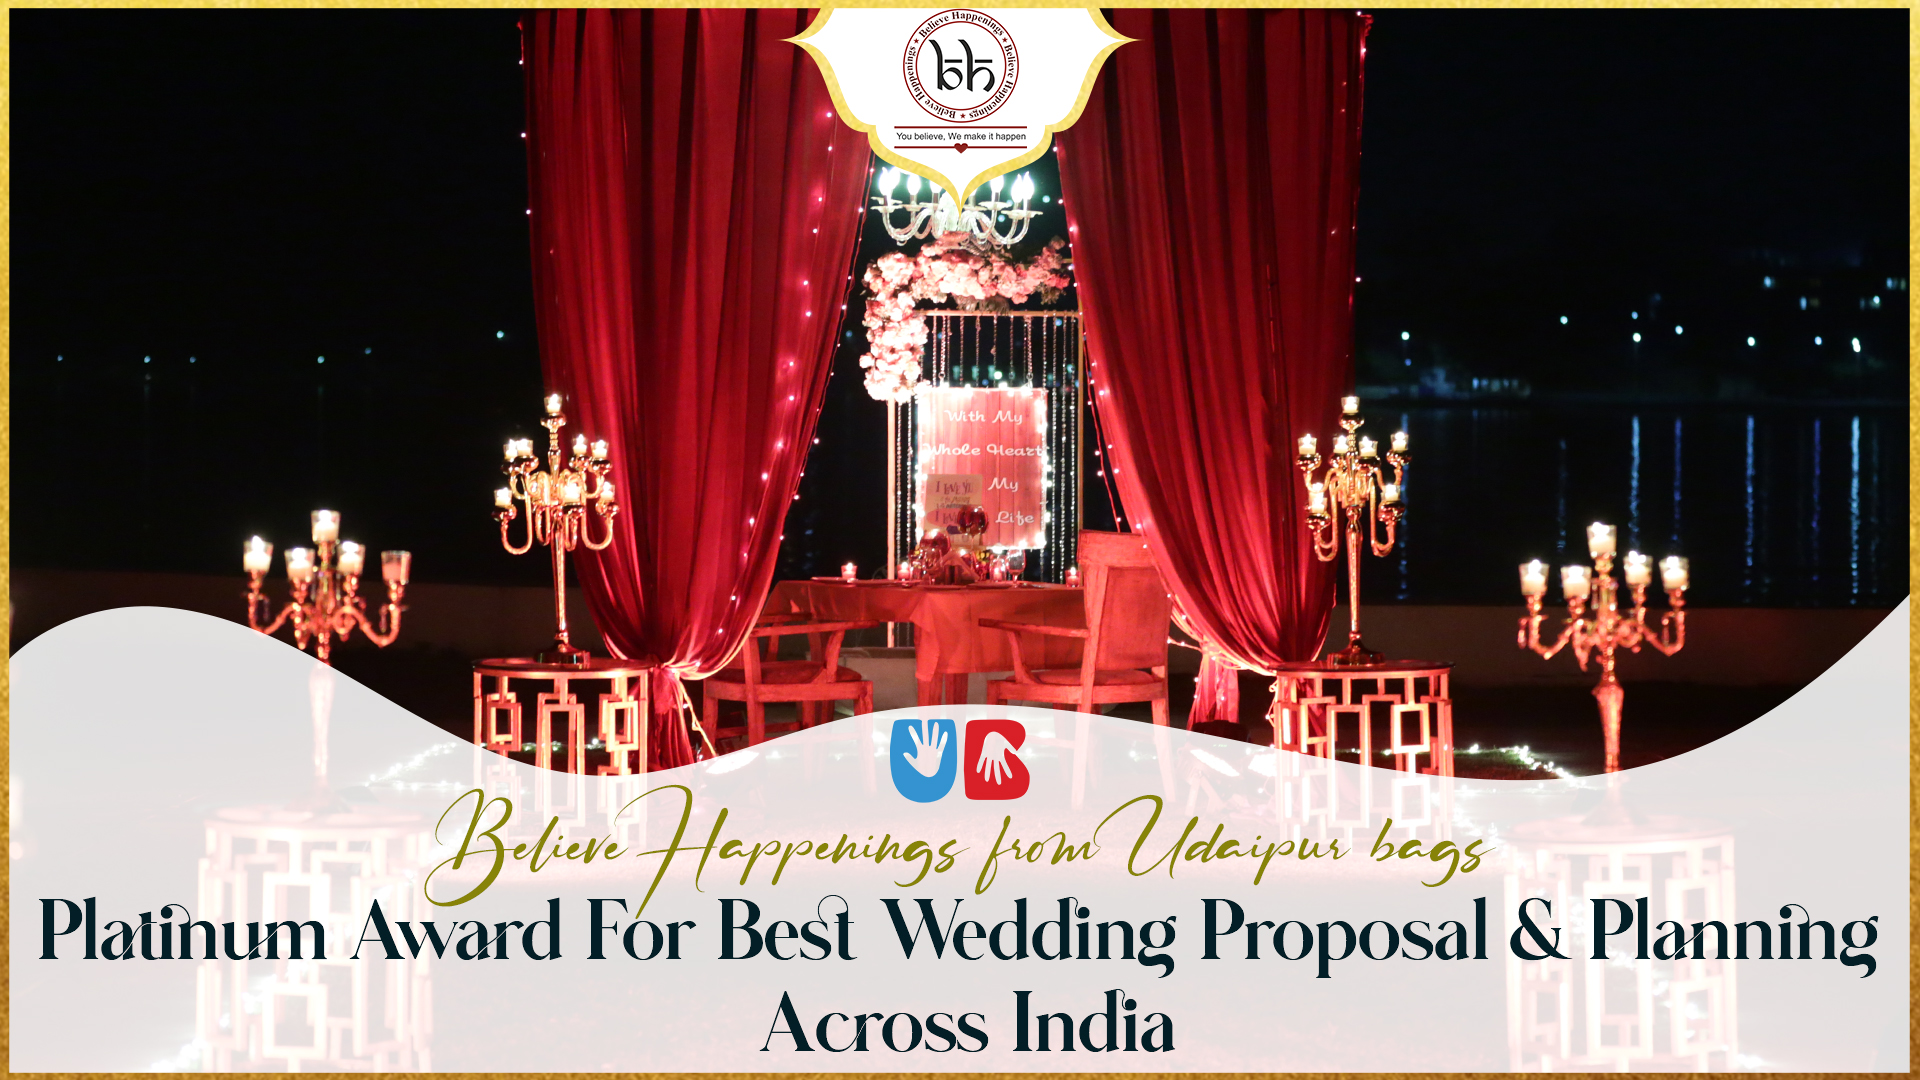 Believe Happenings from Udaipur bags Platinum Award for Best Wedding Proposal & Planning across India